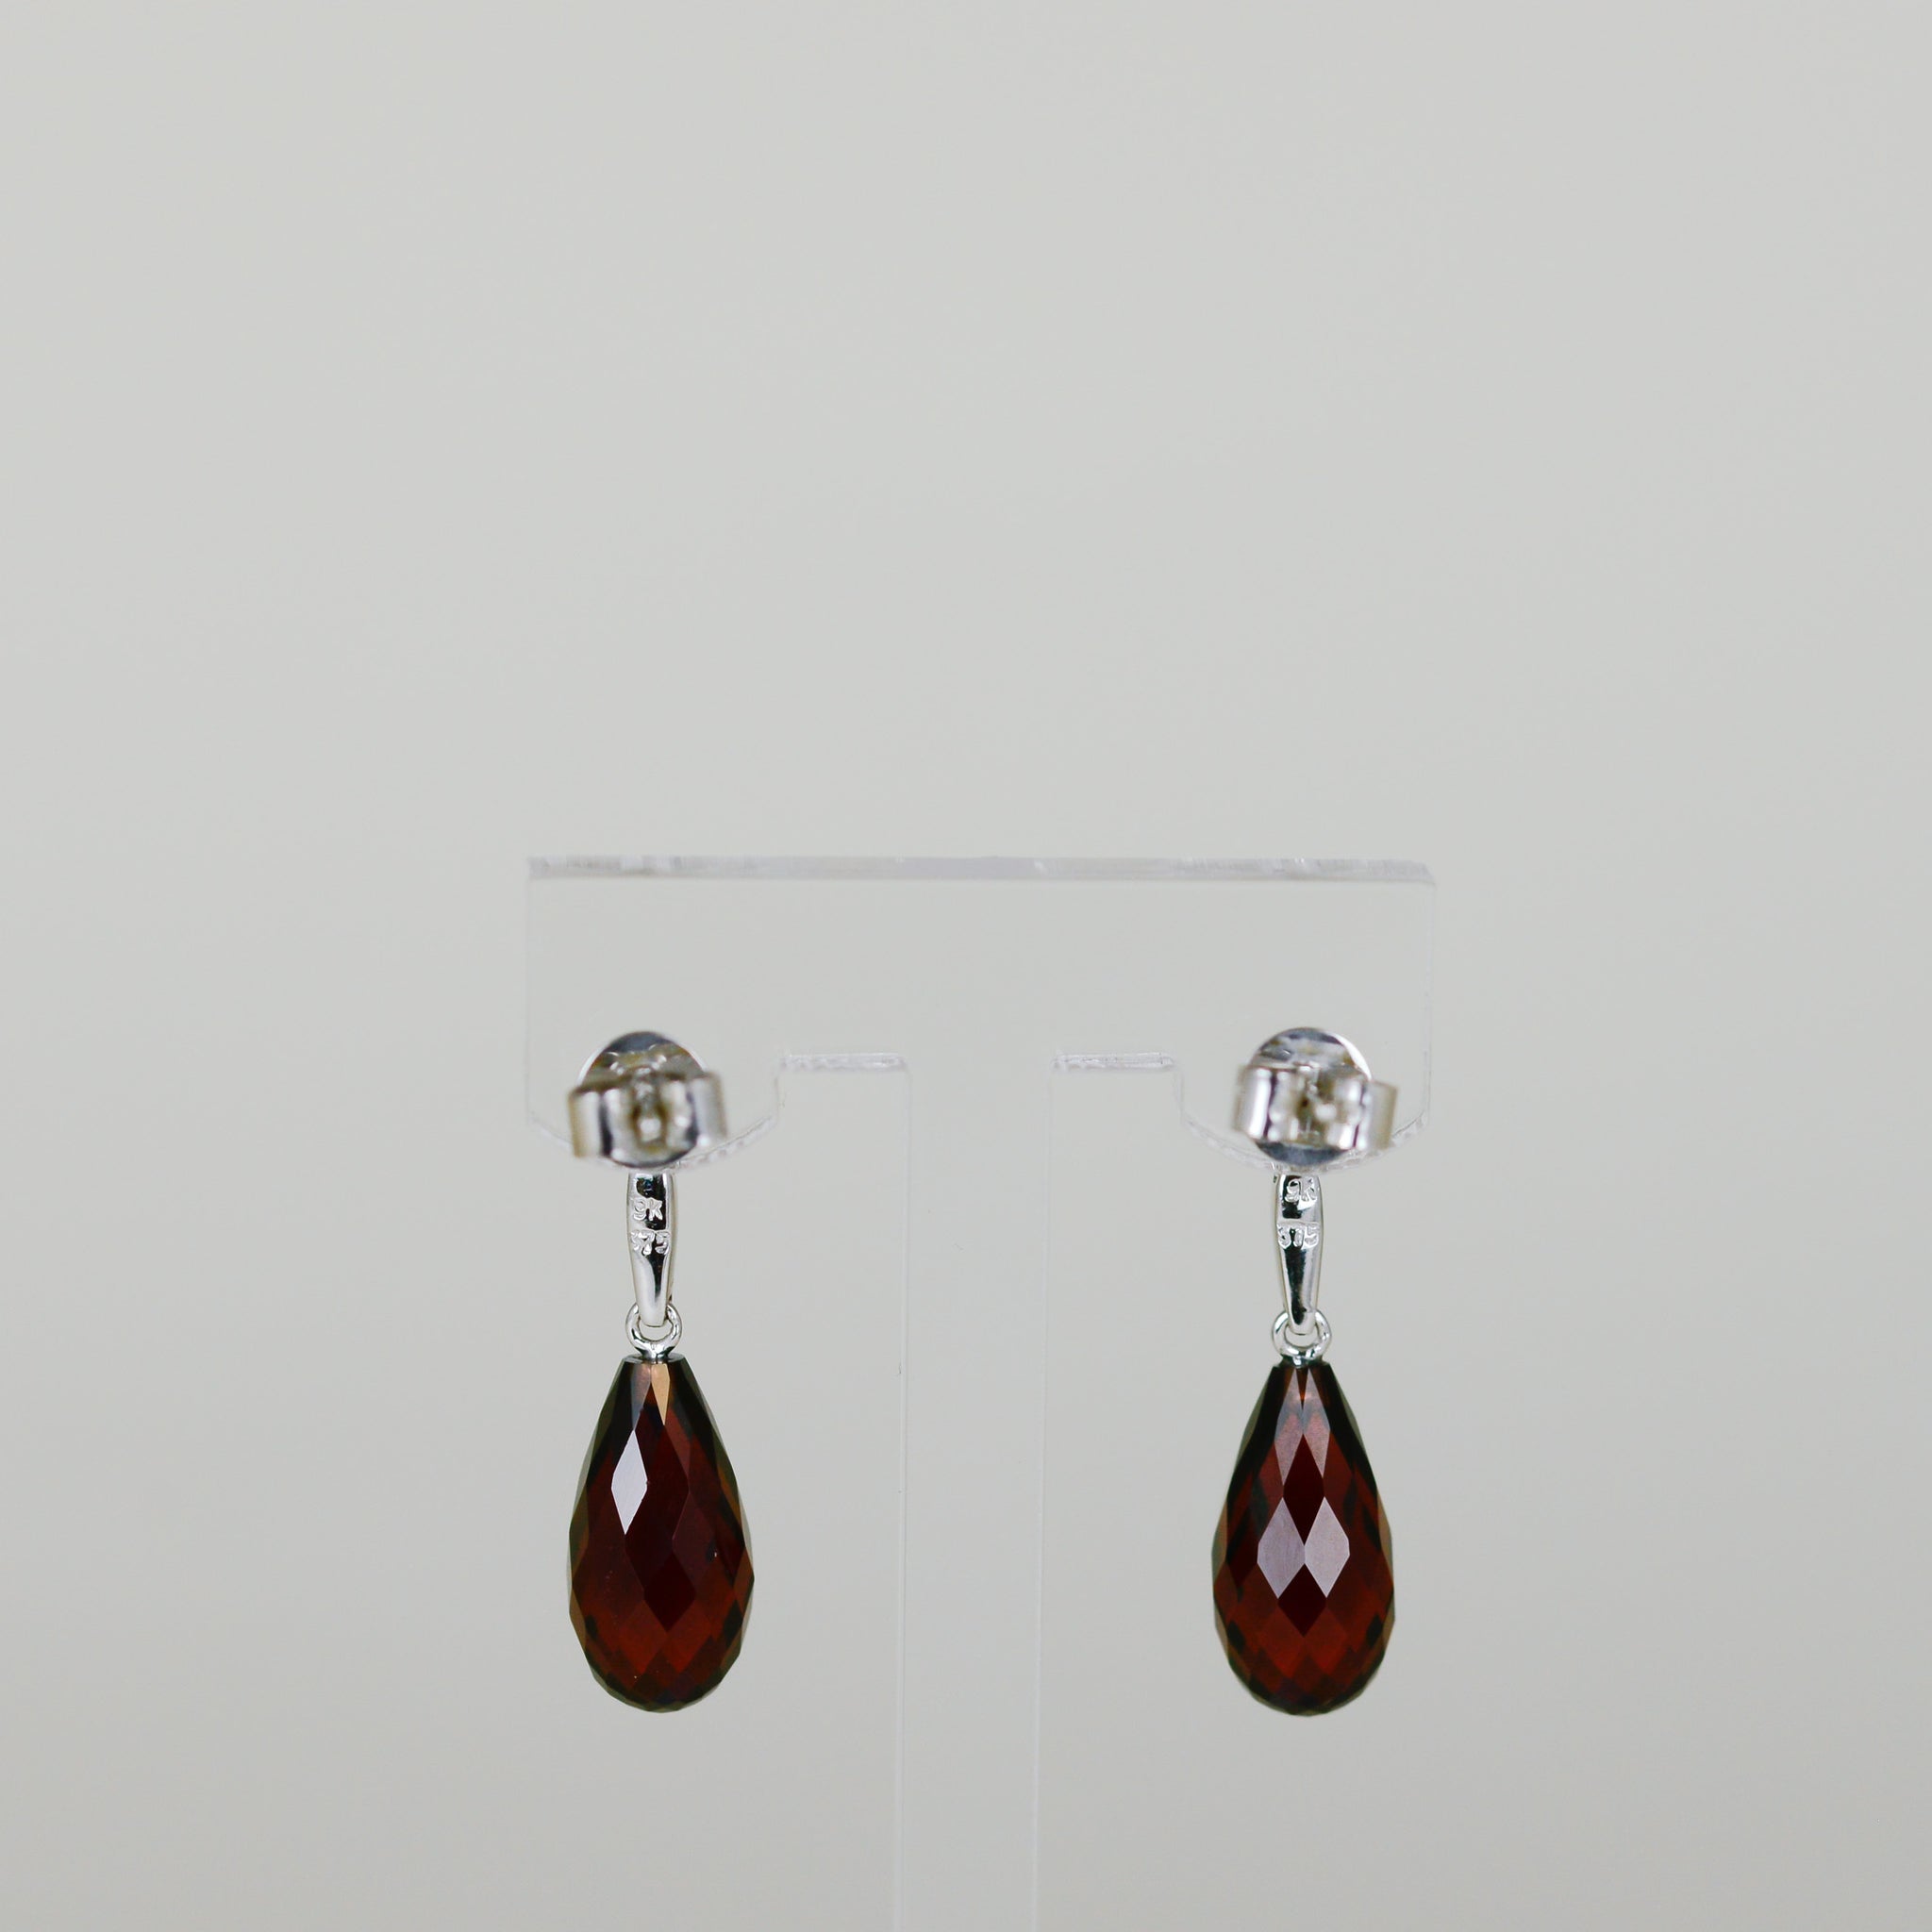 9ct White Gold 14.00ct Pear Briolette Garnet and Diamond Drop Earrings